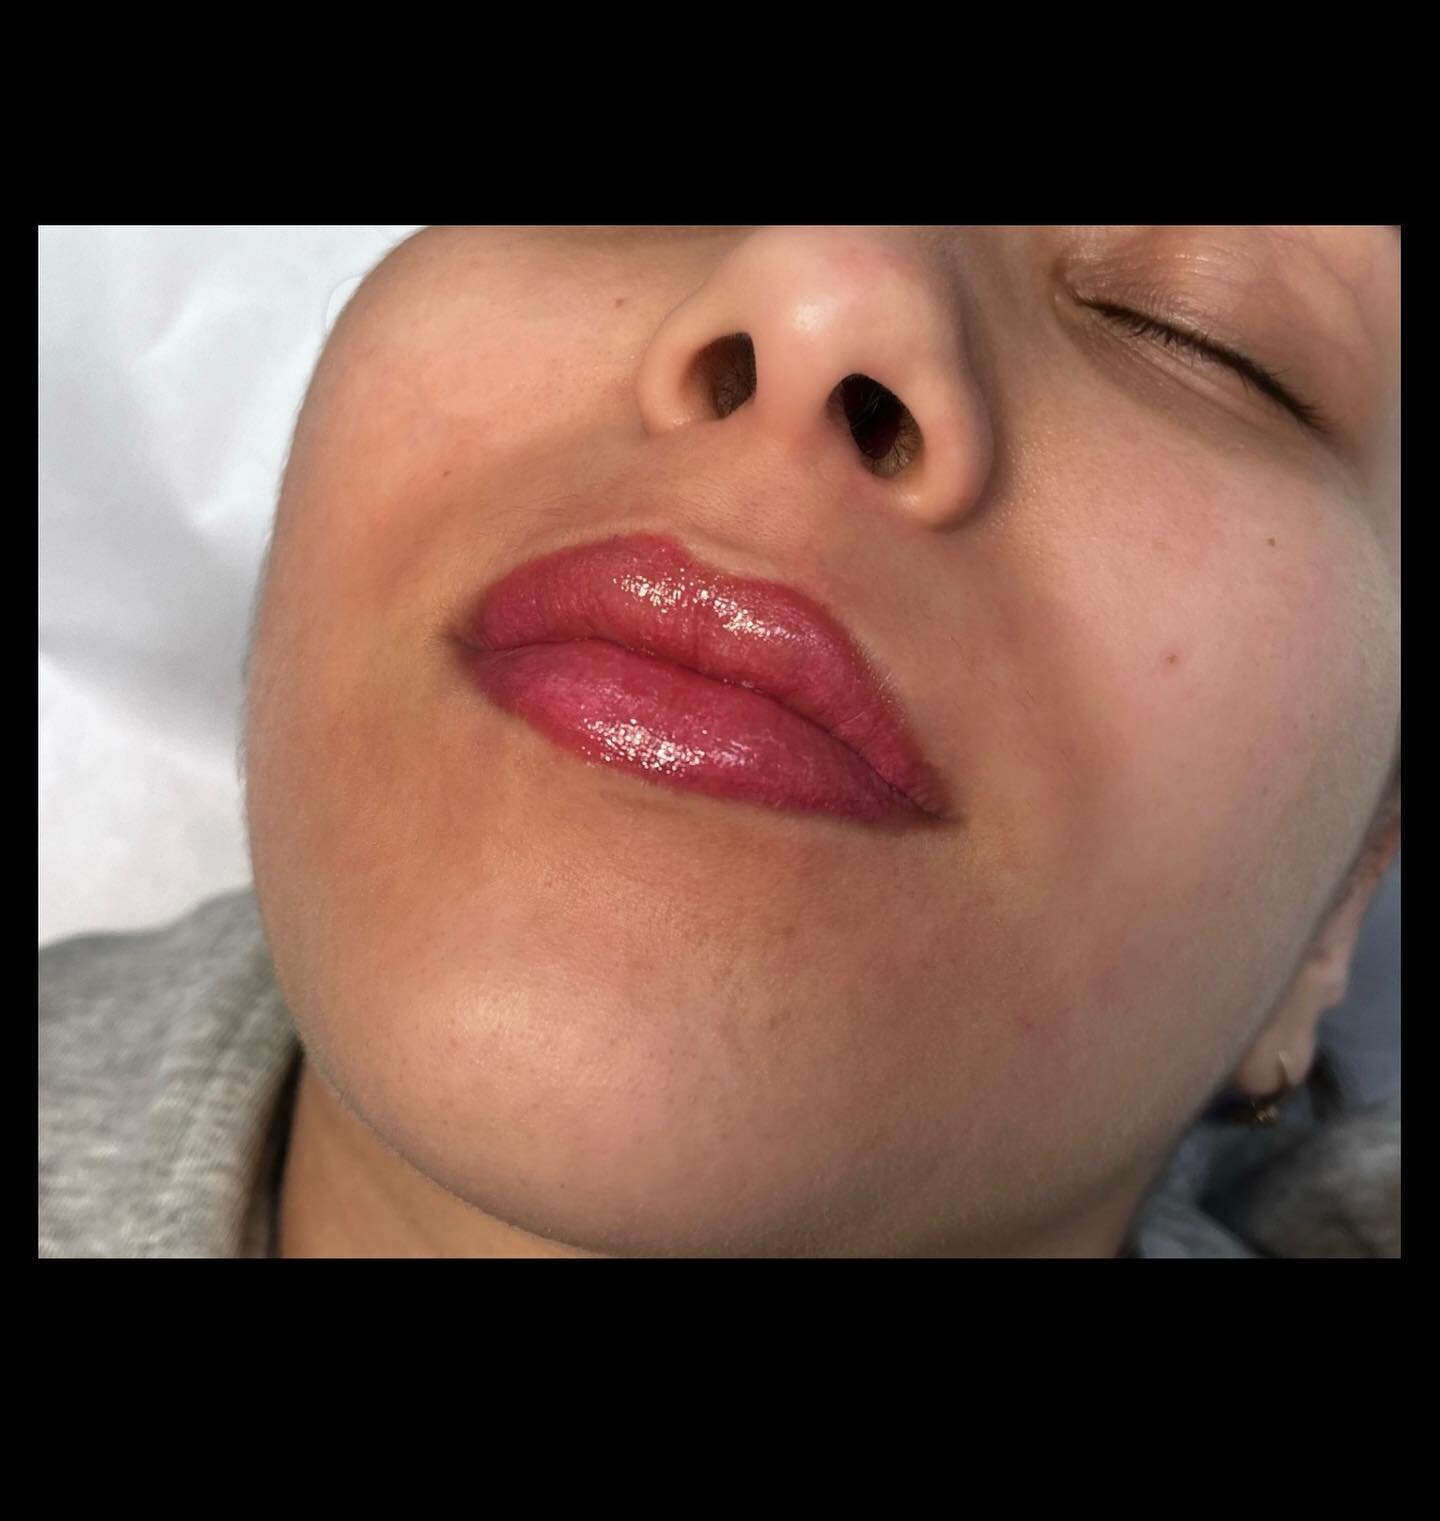 A closer look at this lip blush! 👄 Lip blushing can help you achieve a more defined shape and enhance the color to your lips

Books are open 🤗

#lipblush #lipblushing #lipblushtattoo #permanentmakeup #permanentmakeupartist #permanentmakeuptattoo #n